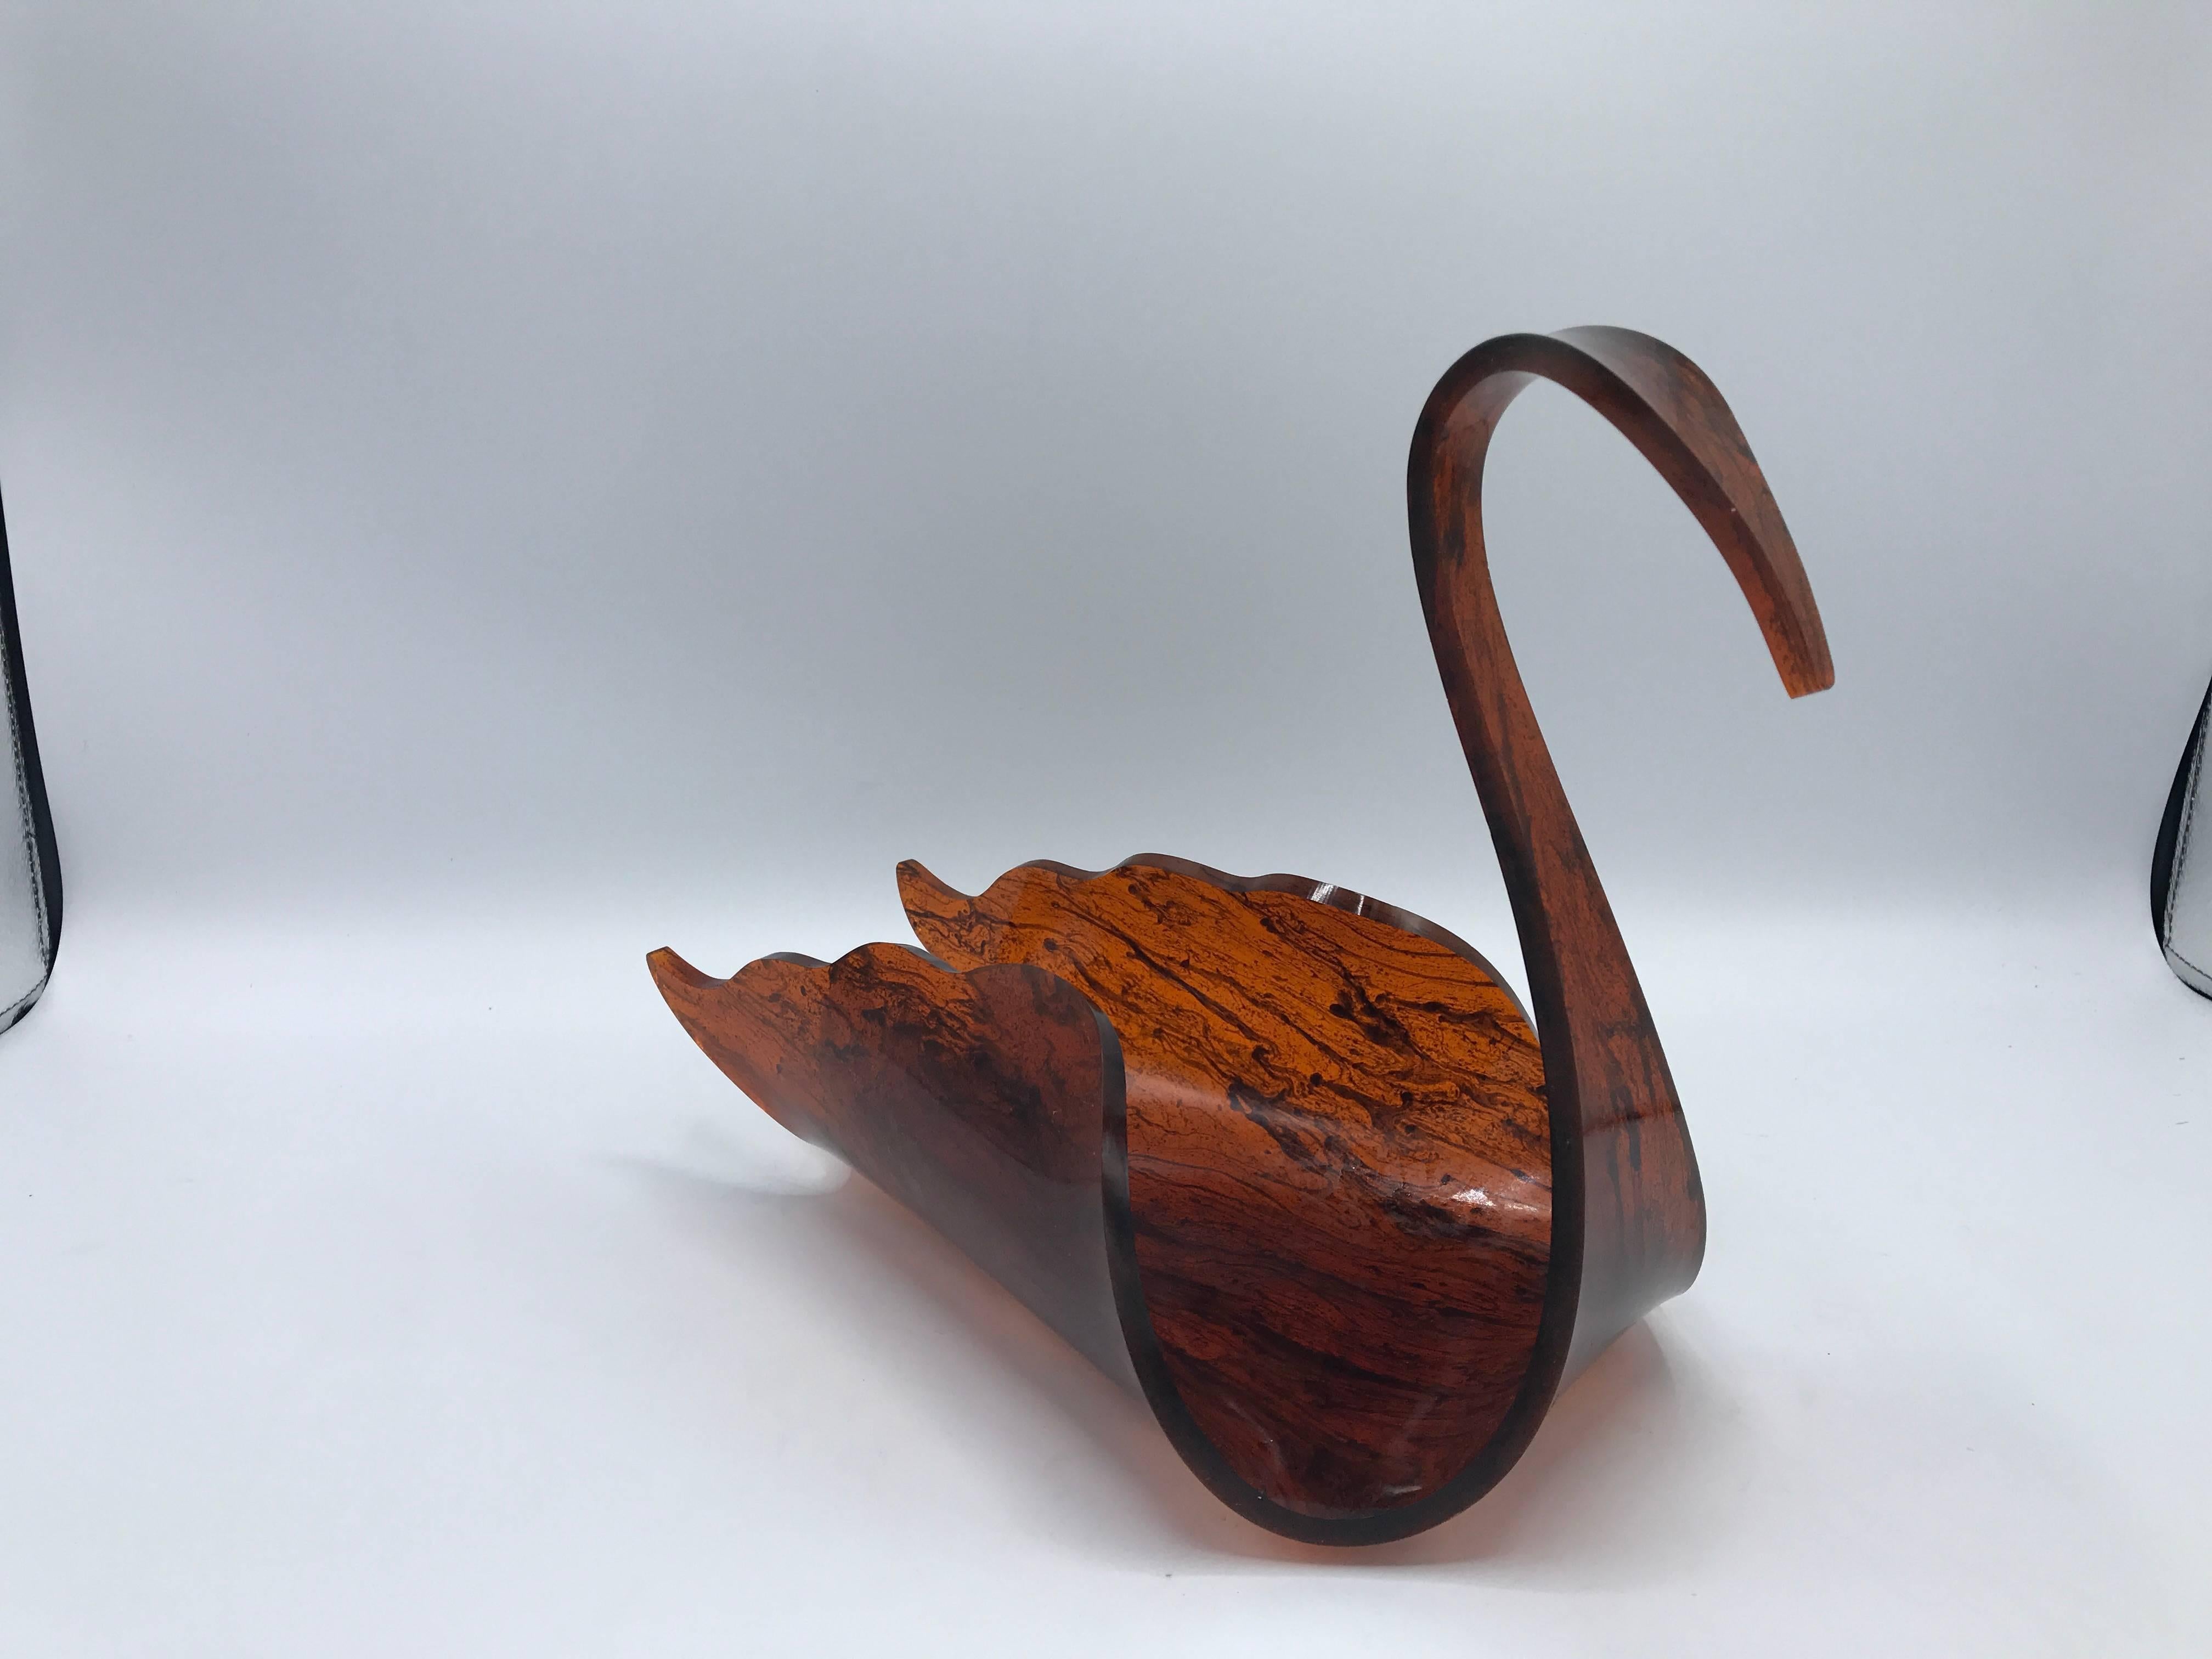 Offered is an exquisite, 1970s Italian tortoise Lucite swan sculpture. The piece doubles as a decorative bowl.